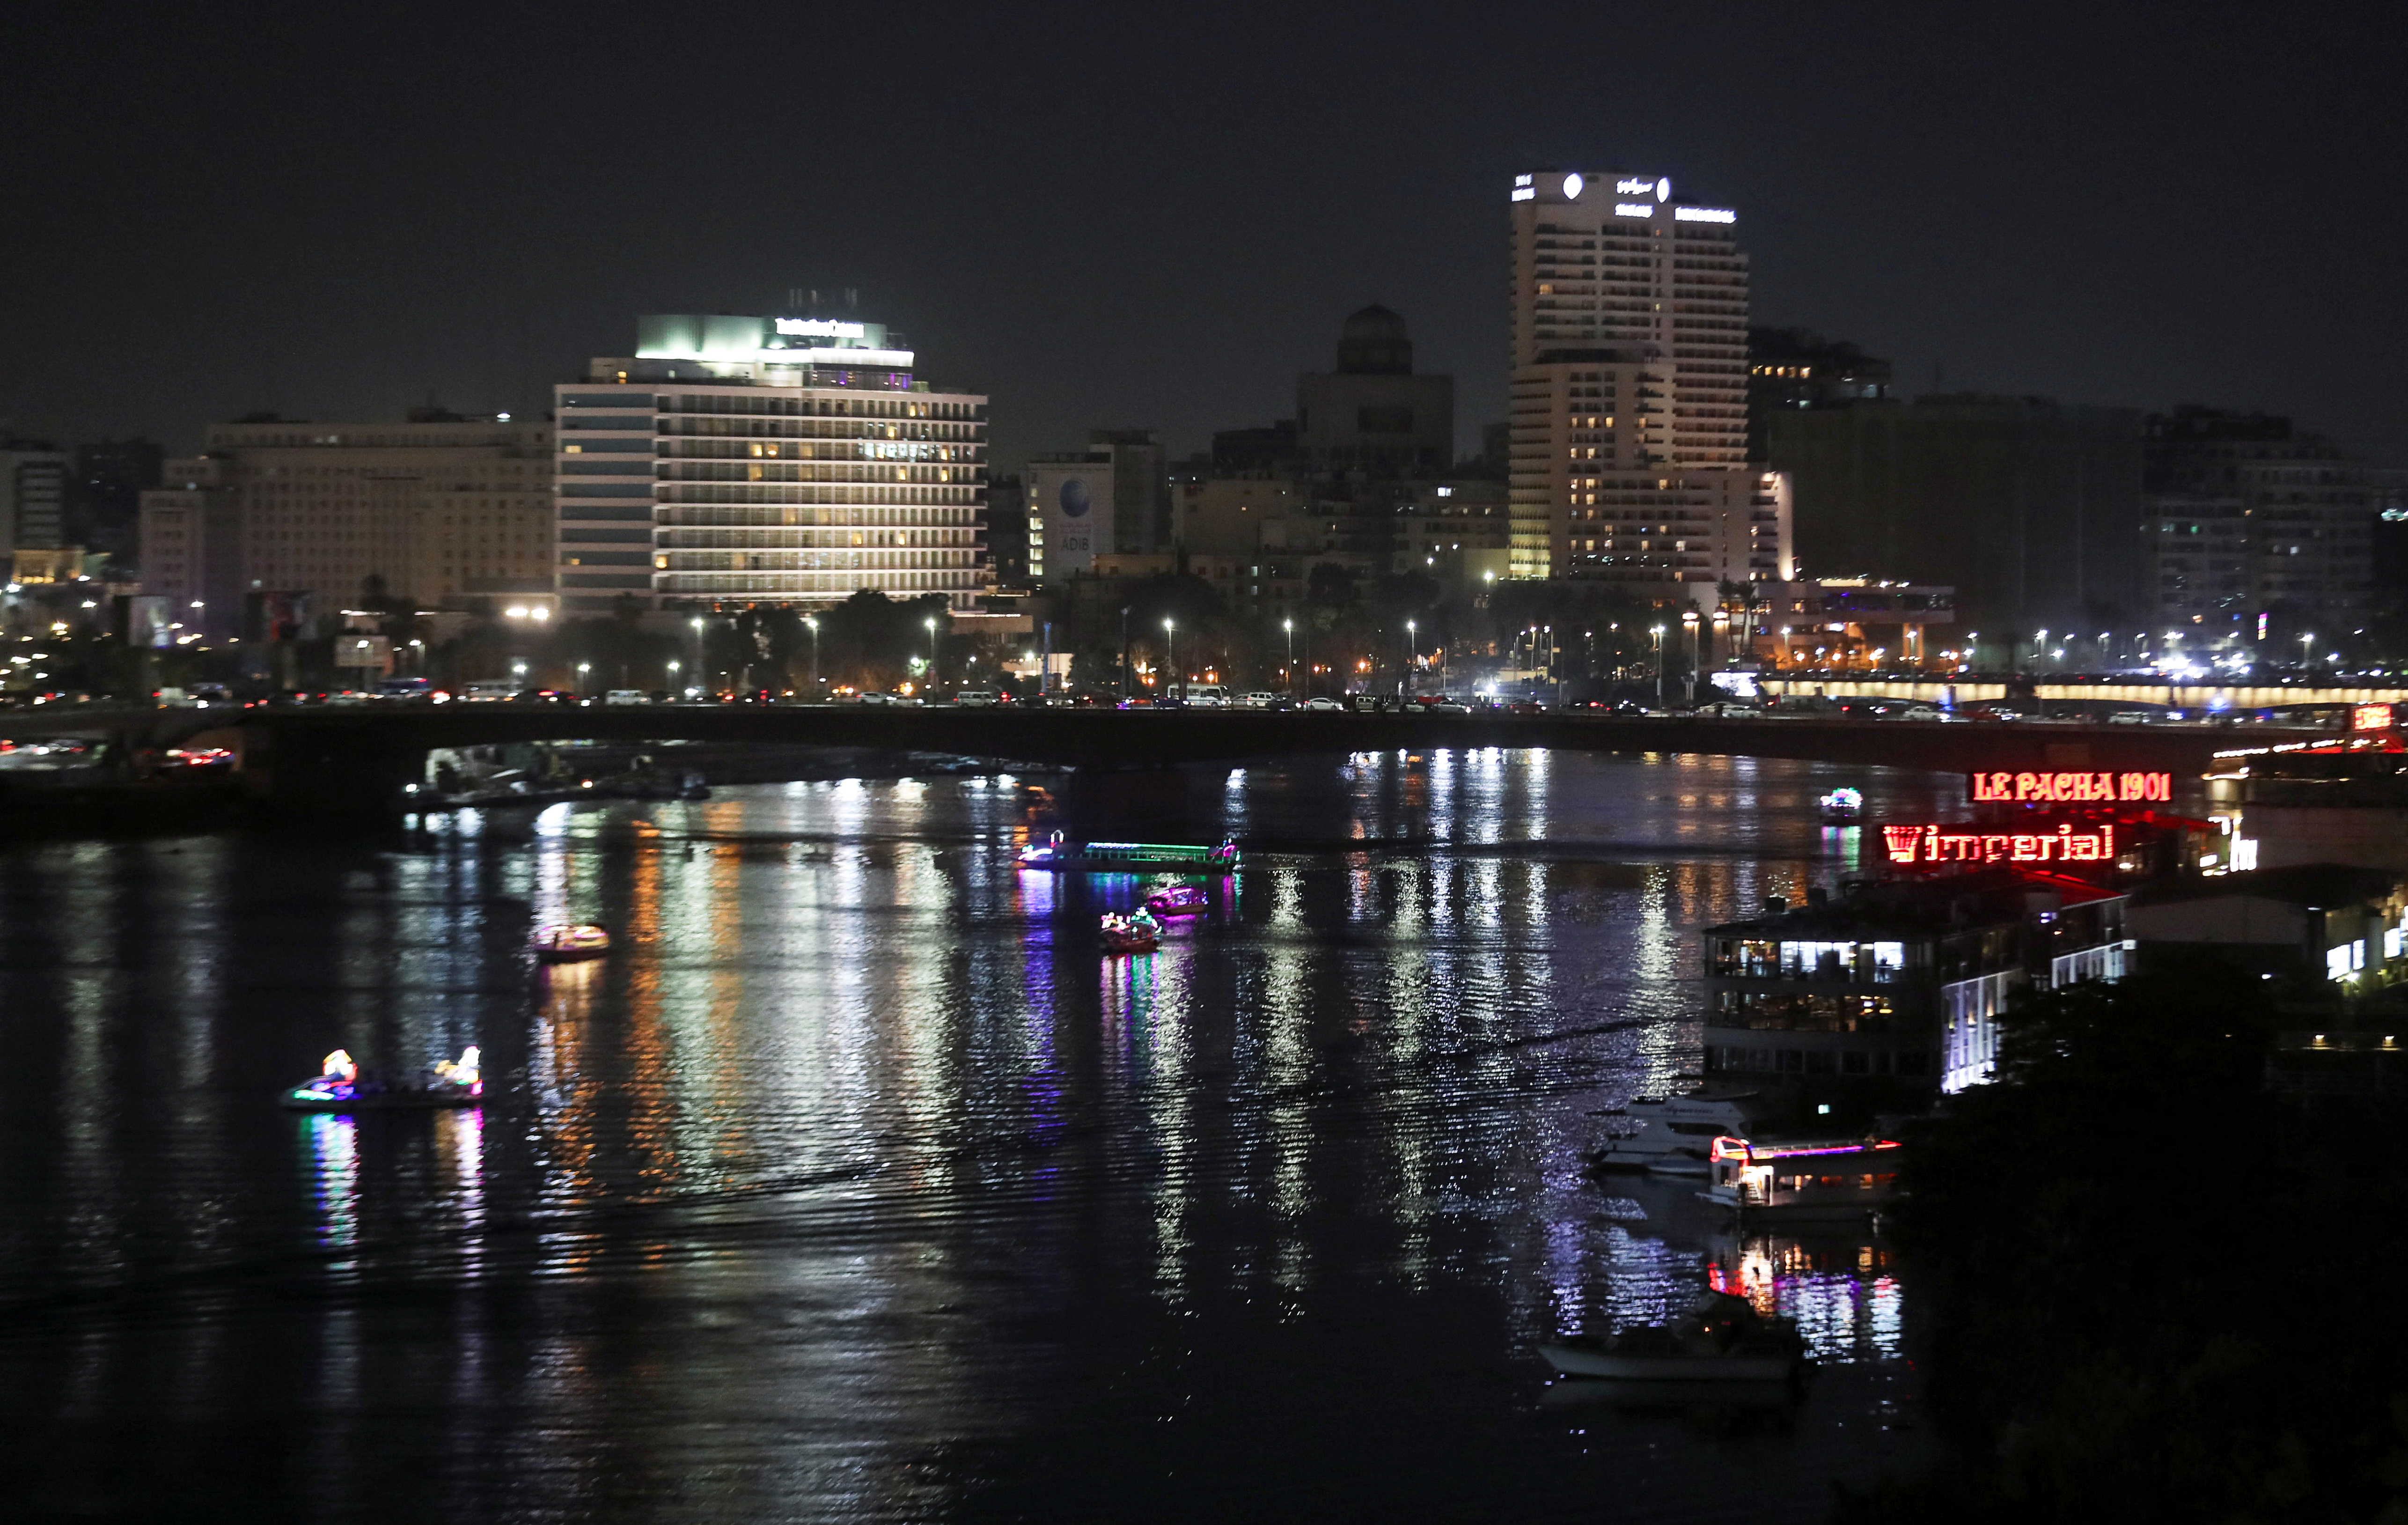 A general view of buildings by the Nile River in Cairo,